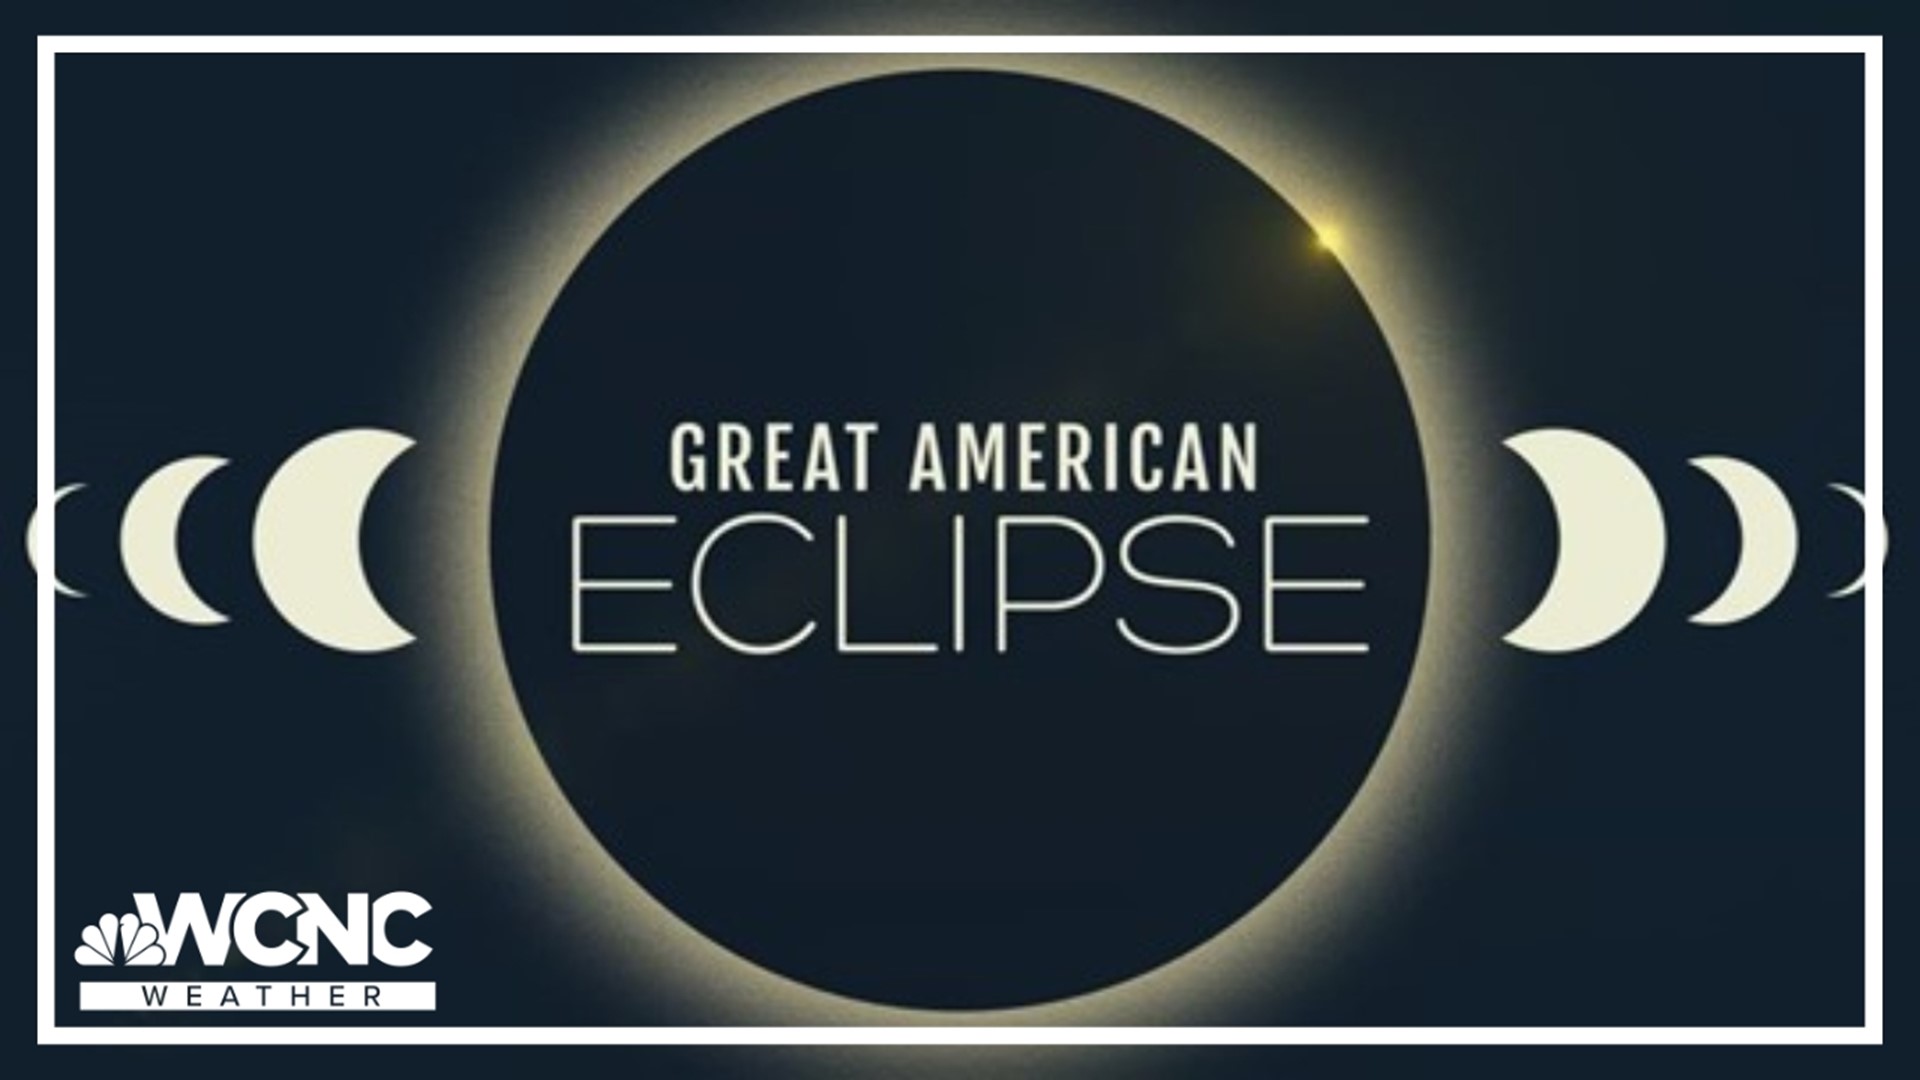 A solar eclipse will cause a spectacle and spark scientific insight across much of the United States today.